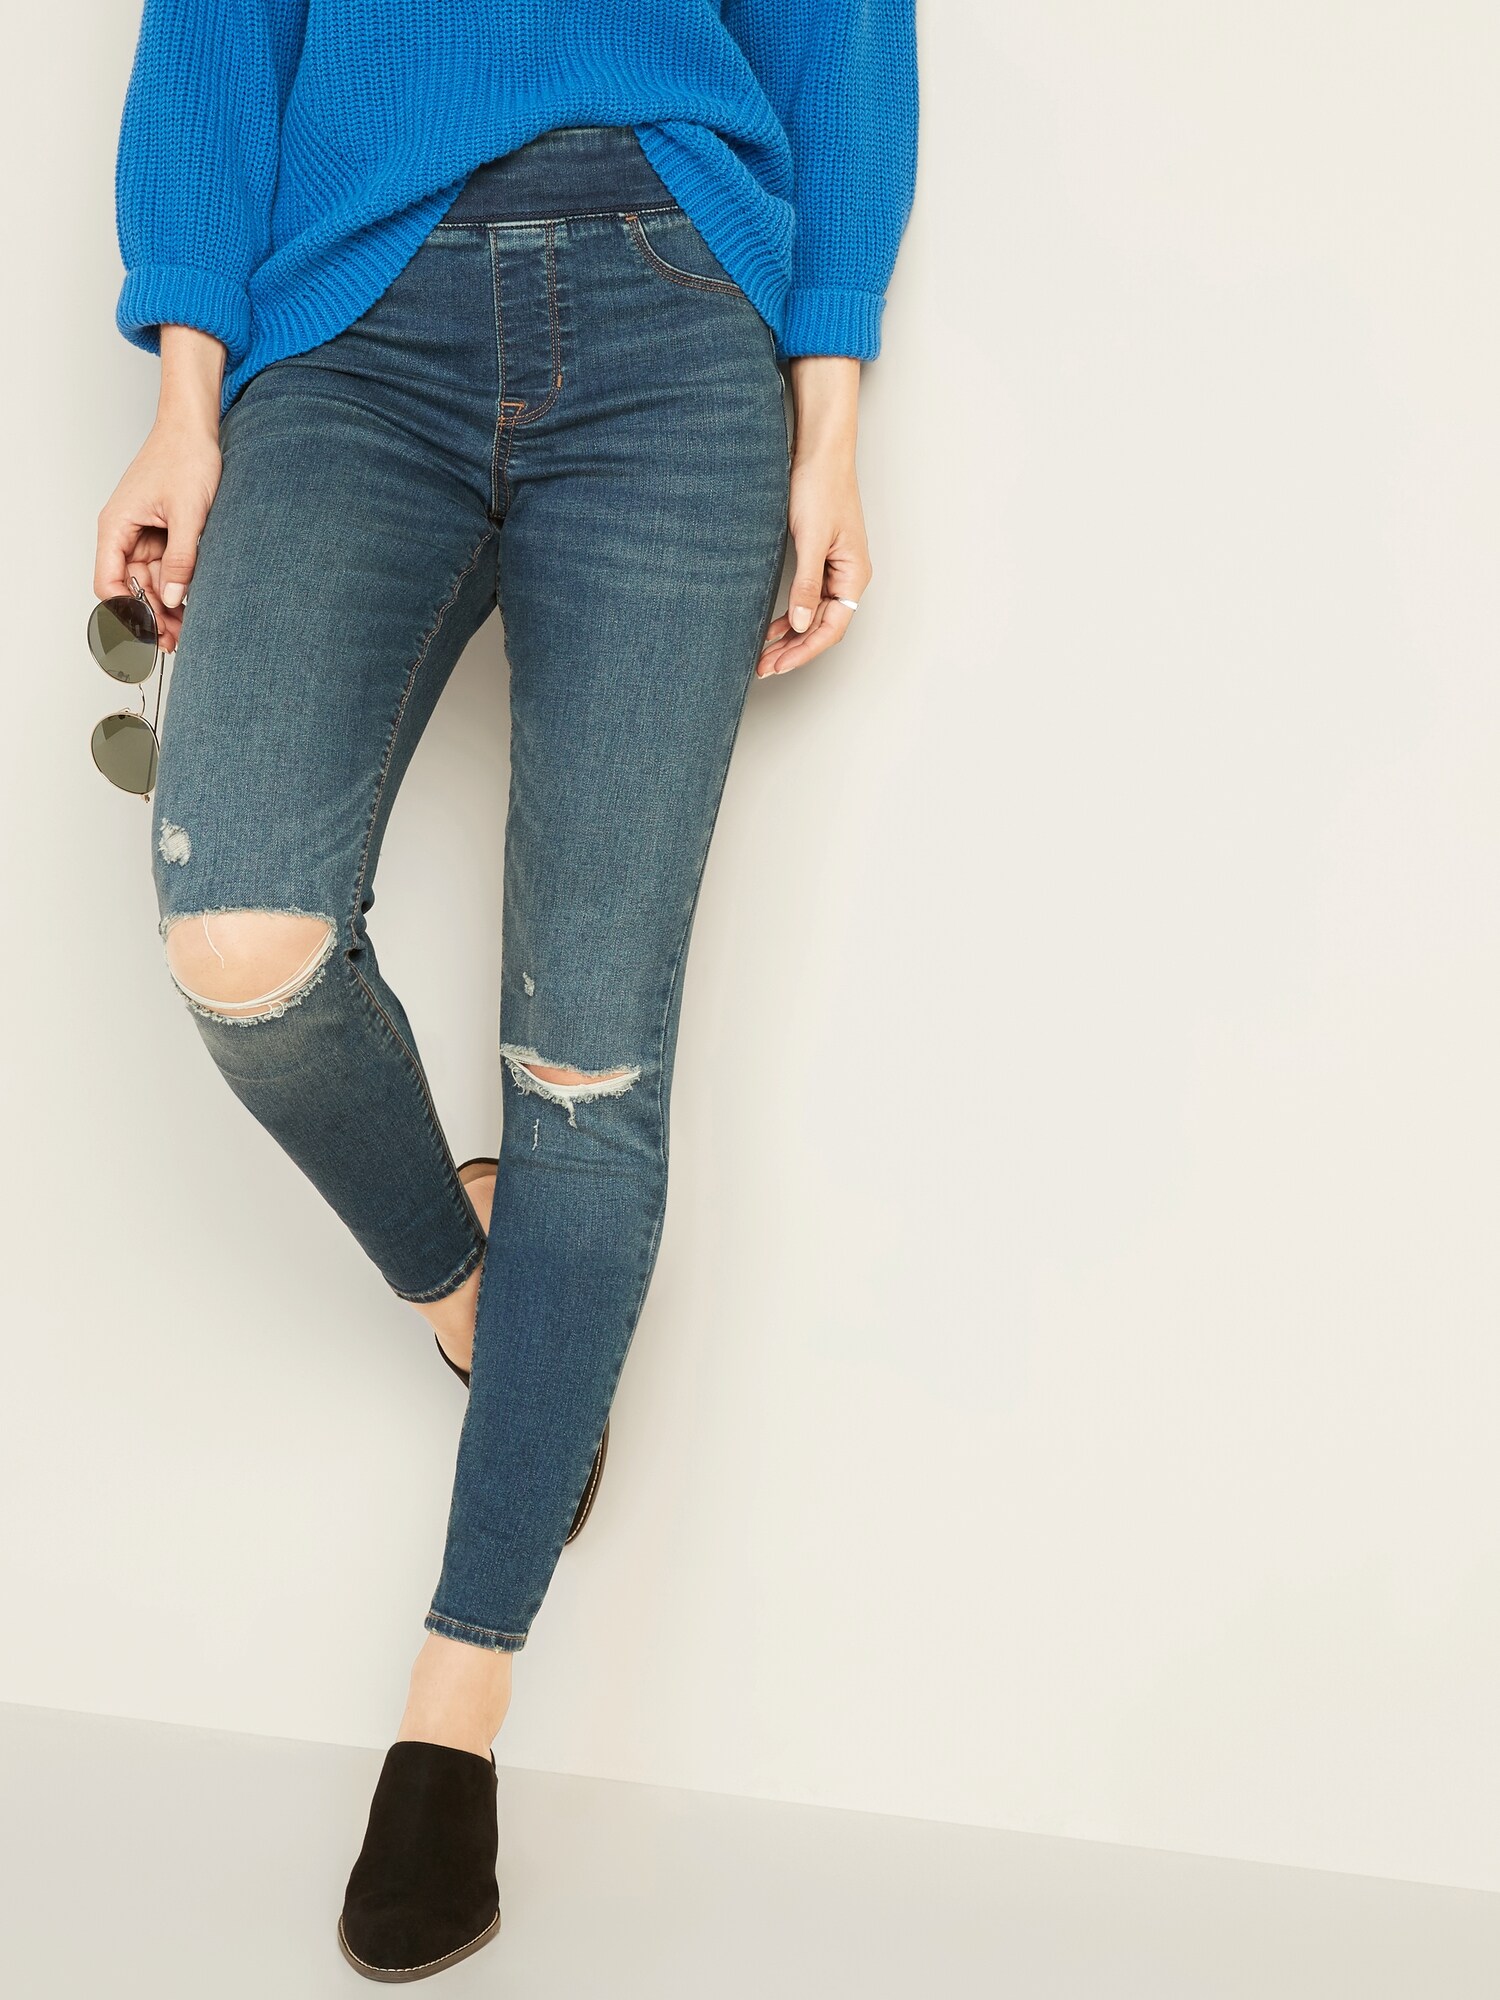 old navy mid rise distressed rockstar jeans